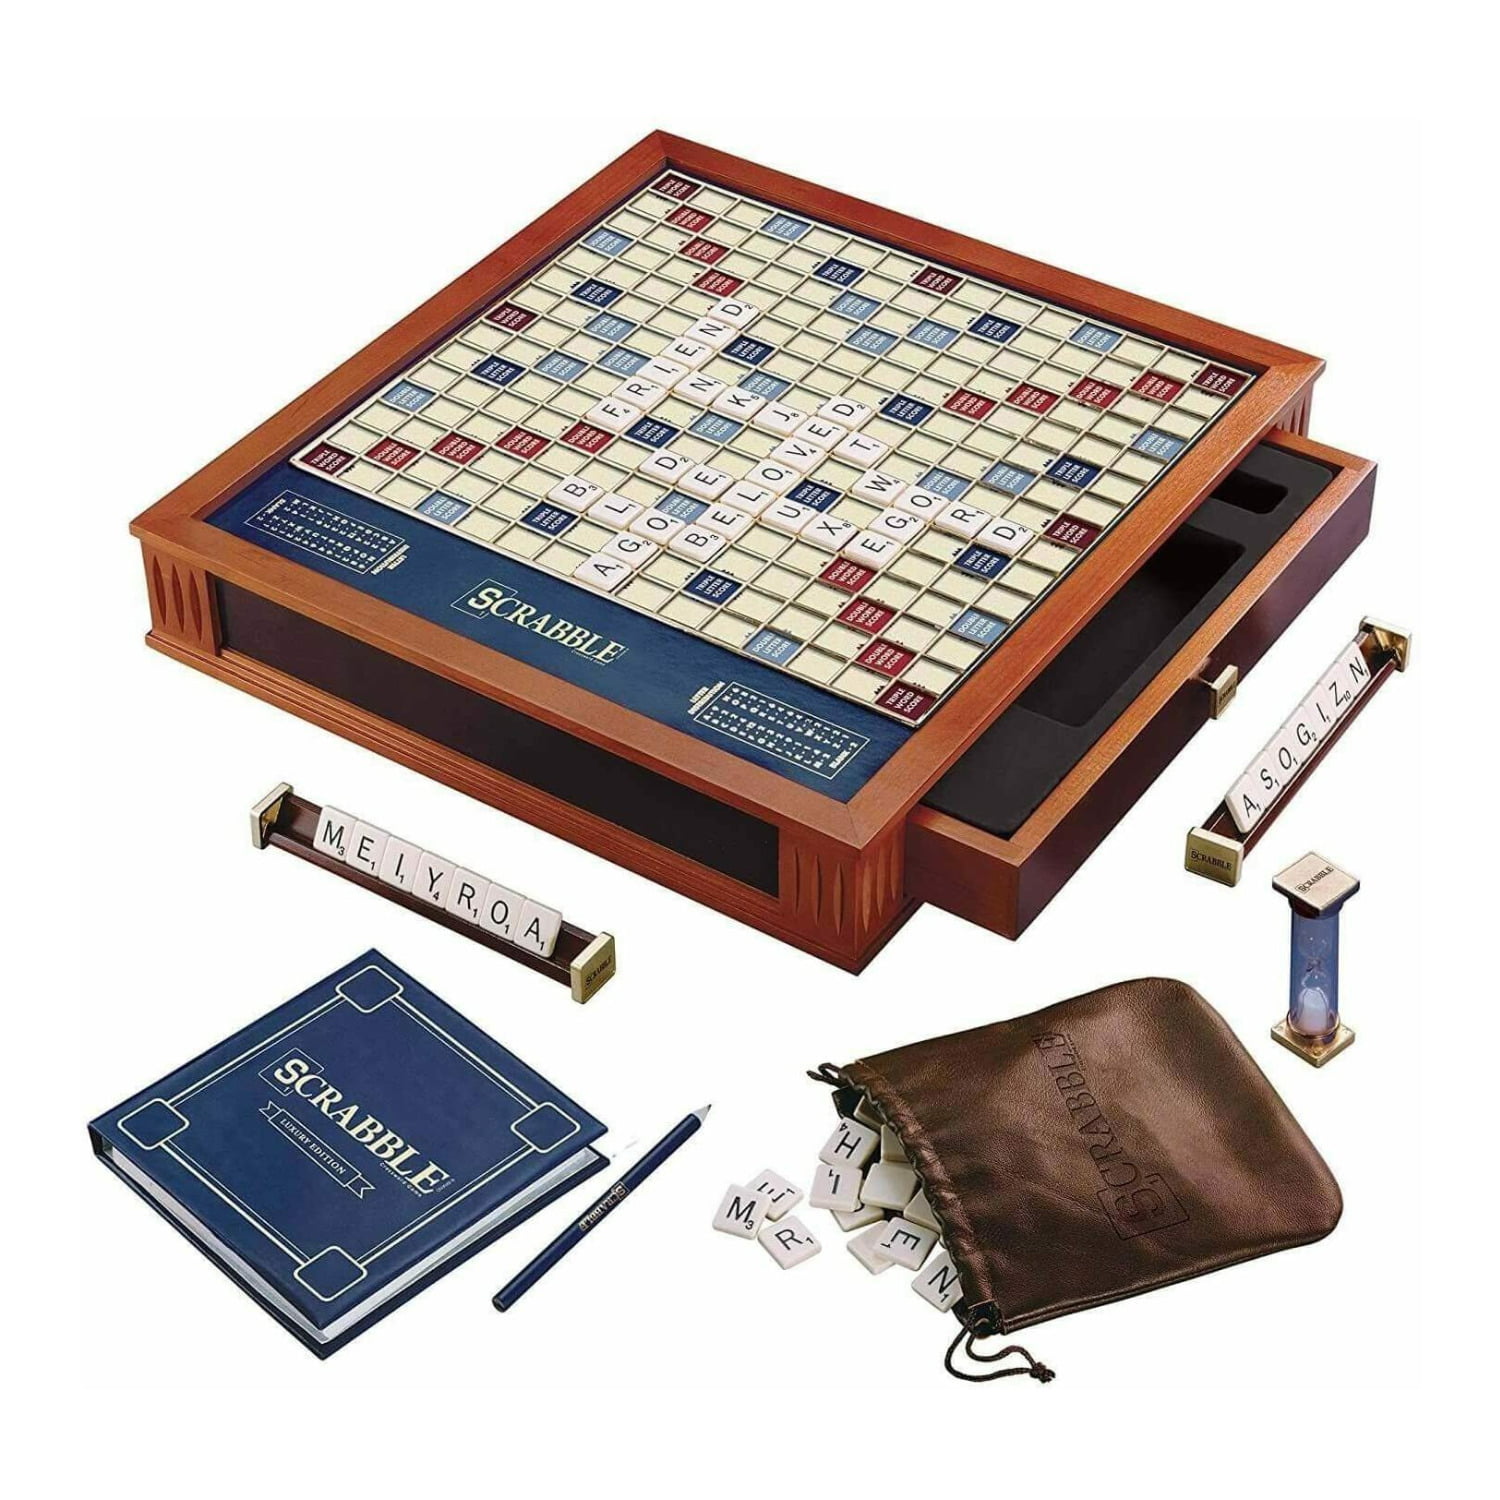 Winning Solutions Luxury Edition Scrabble Game Rotating Faux leather Board NEW 